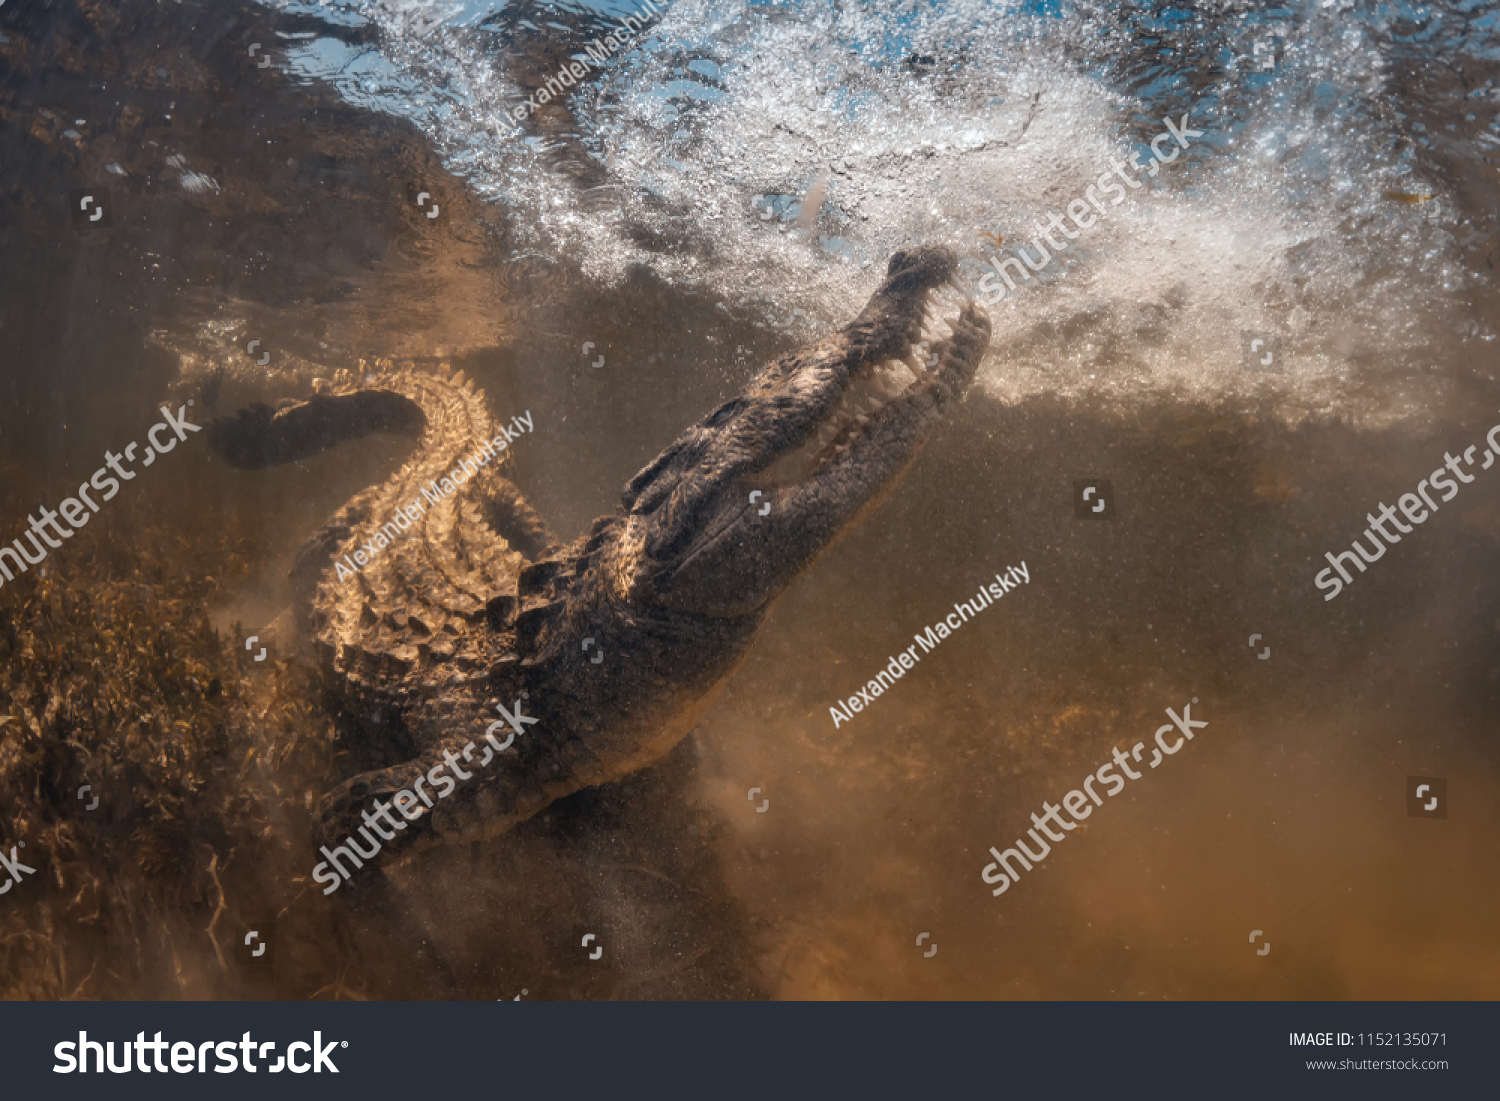 Saltwater crocodile underwater opens mouth and teeth in Chinchorro Banco Mexico, yellow salt water. #1152135071